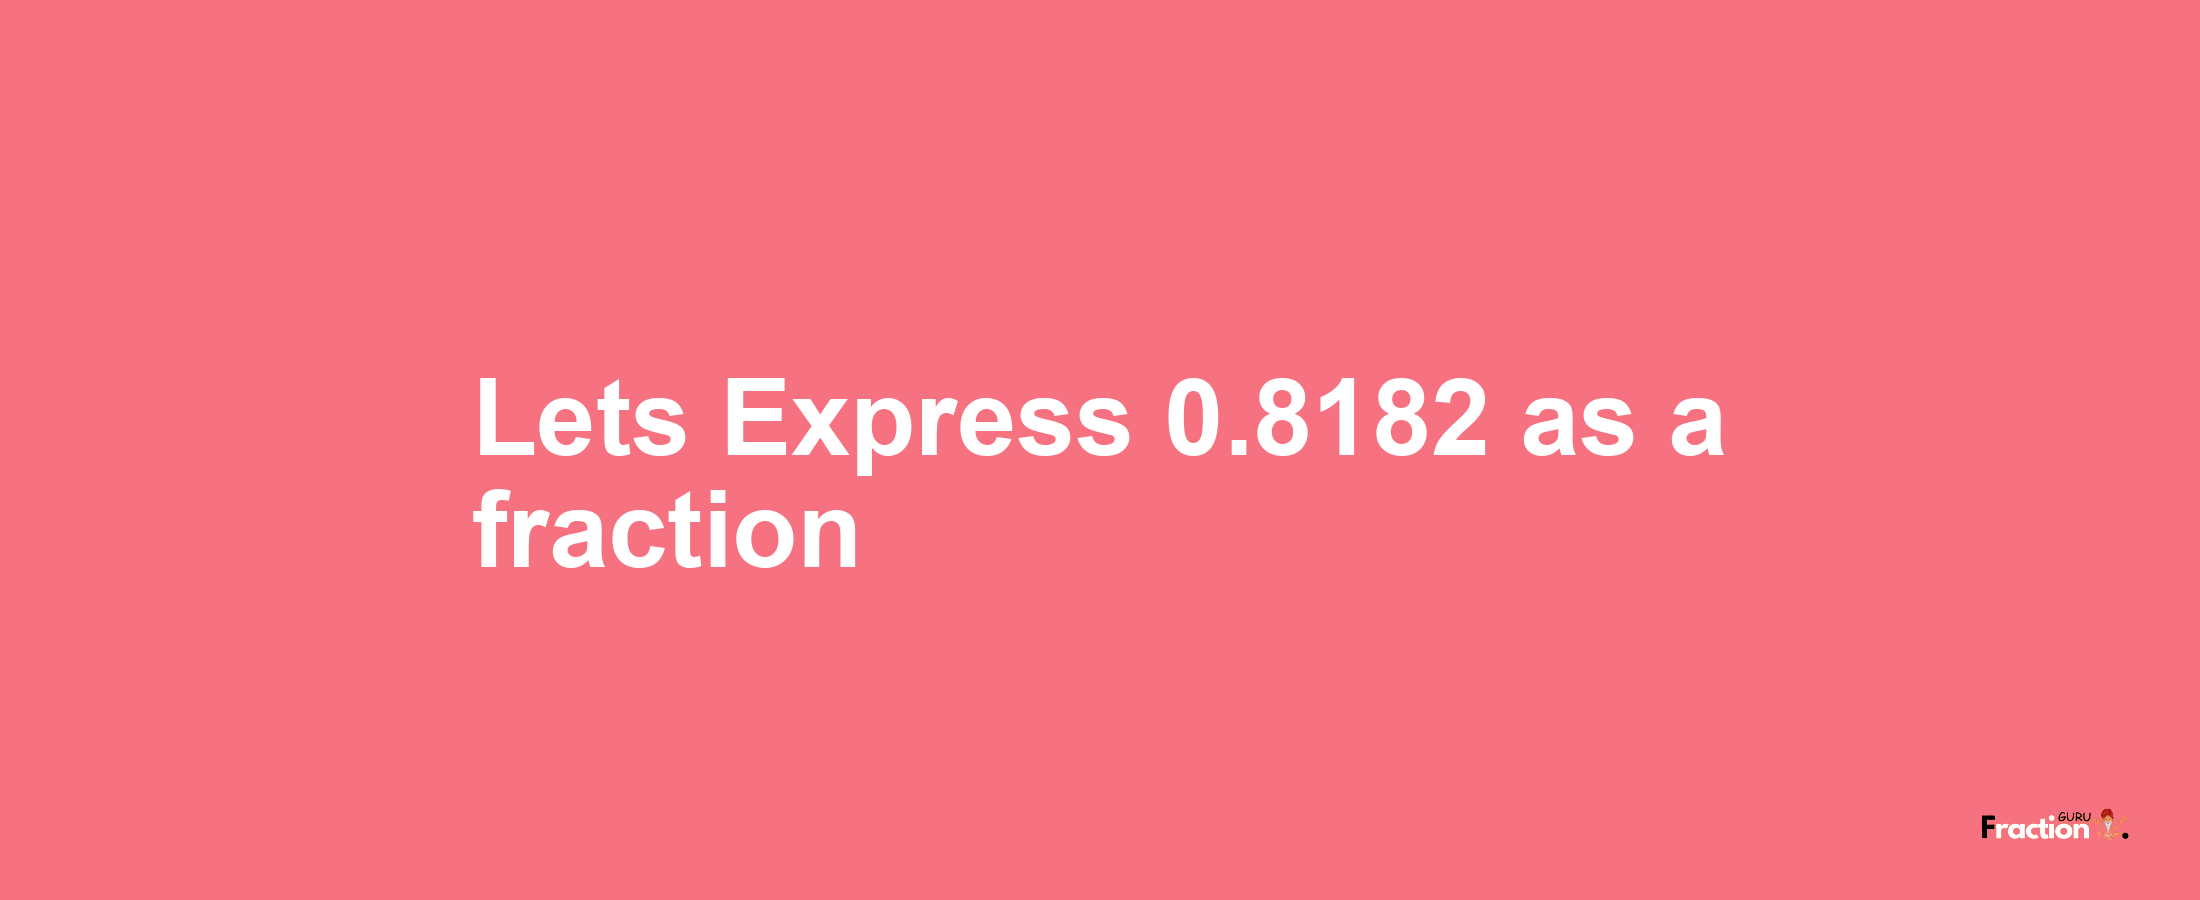 Lets Express 0.8182 as afraction